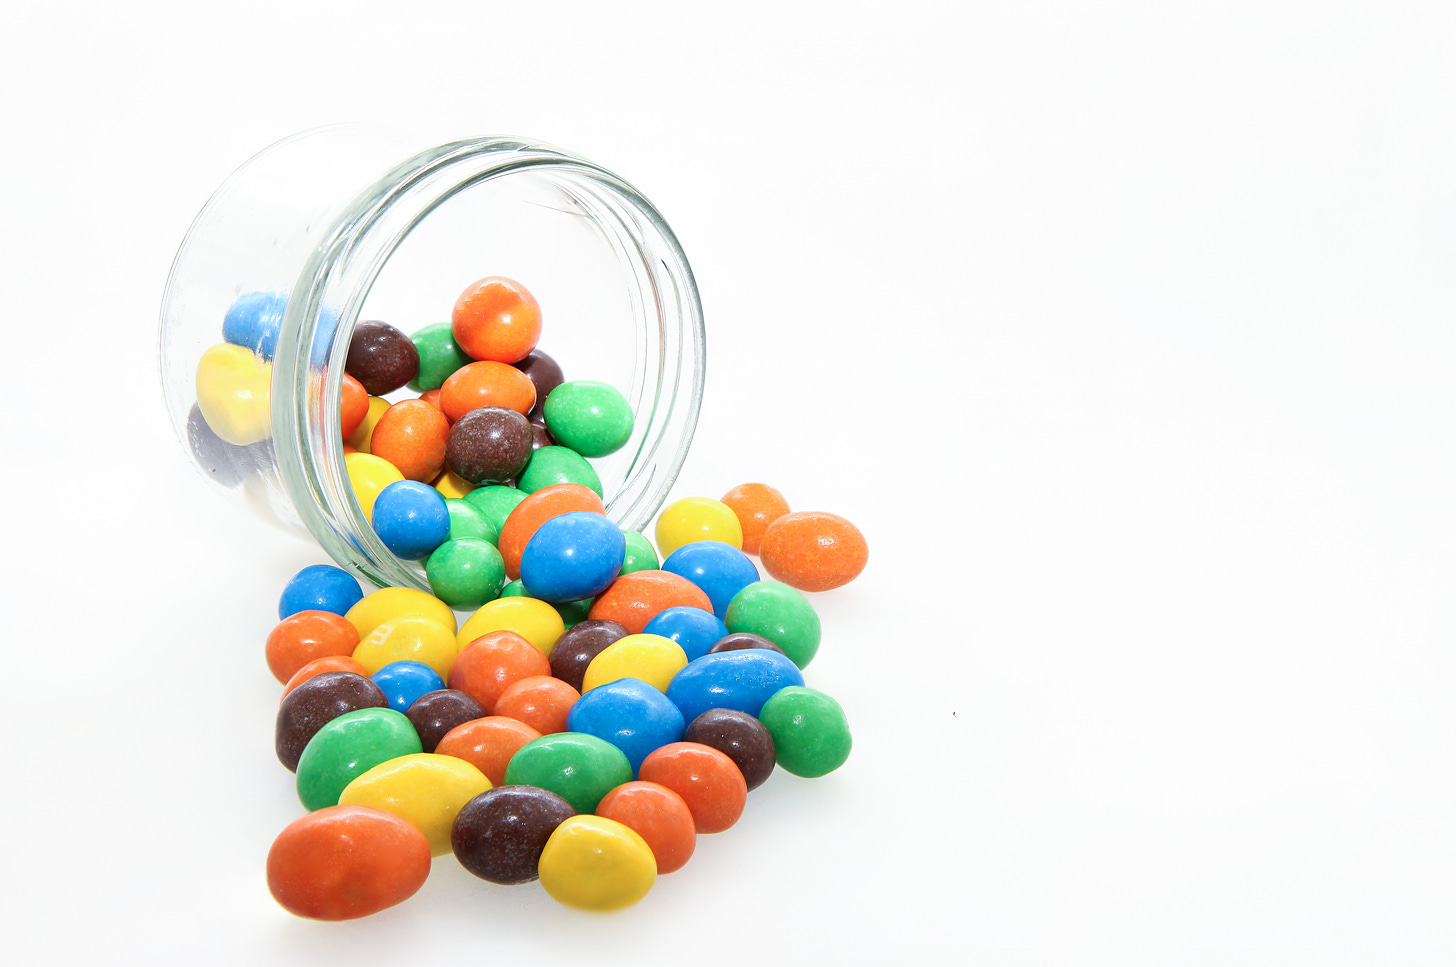 Glass jar on its side with candy-coated chocolate spilling out